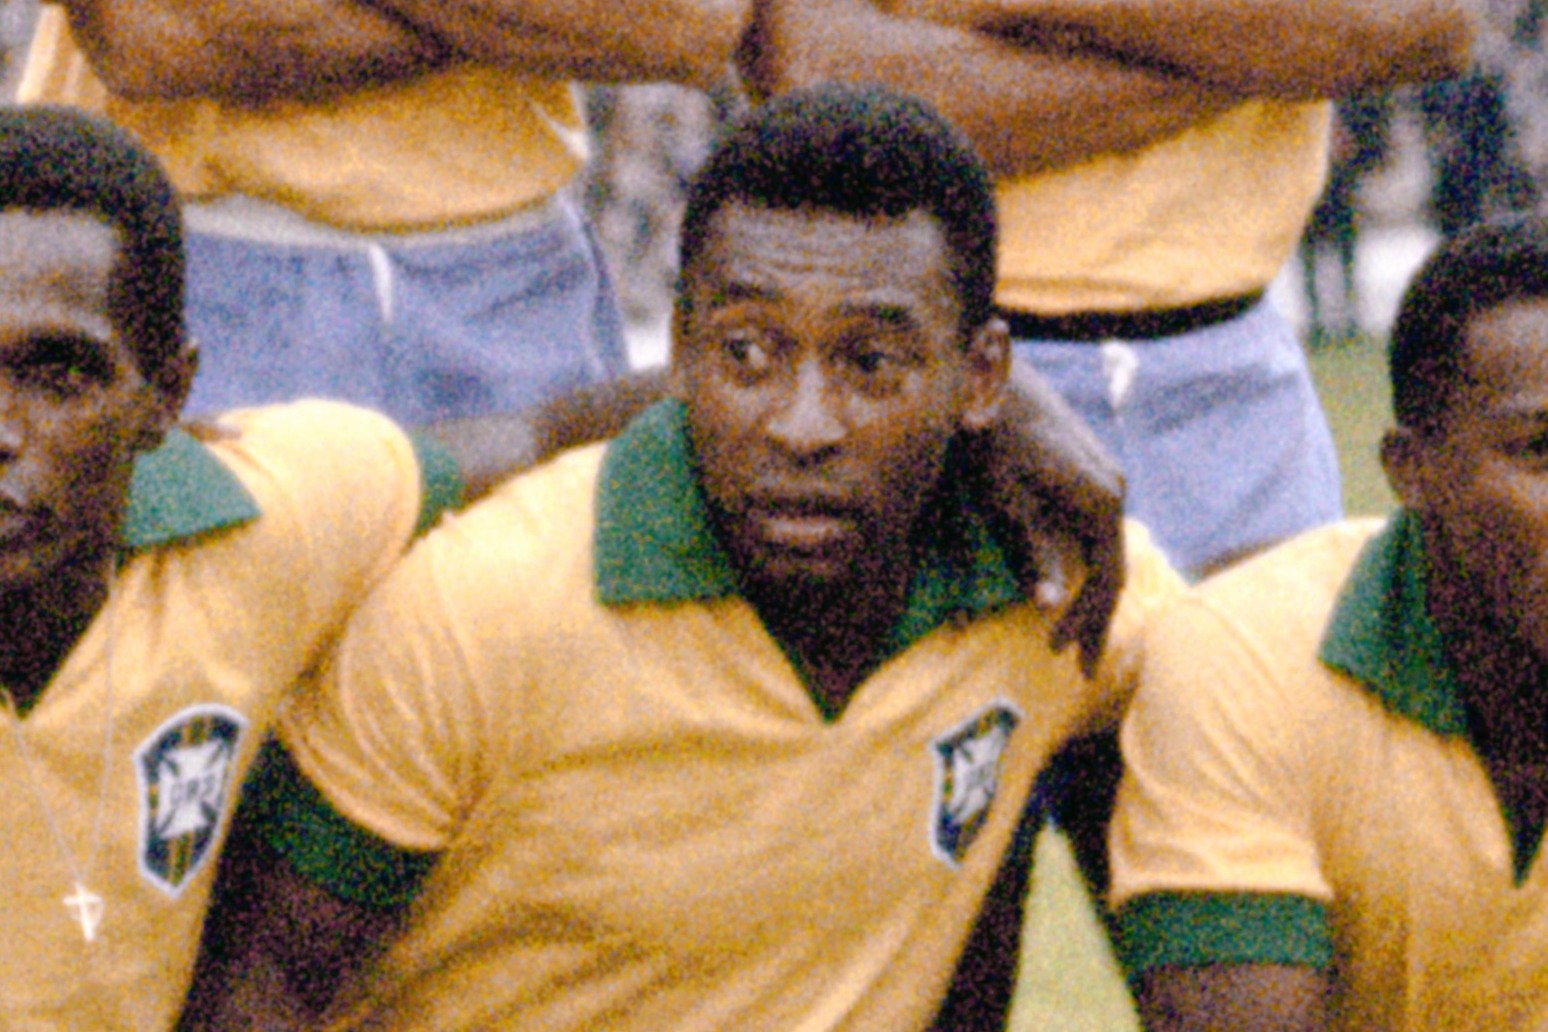 ‘The greatest of all time’ – Tributes paid after Pele dies aged 82 